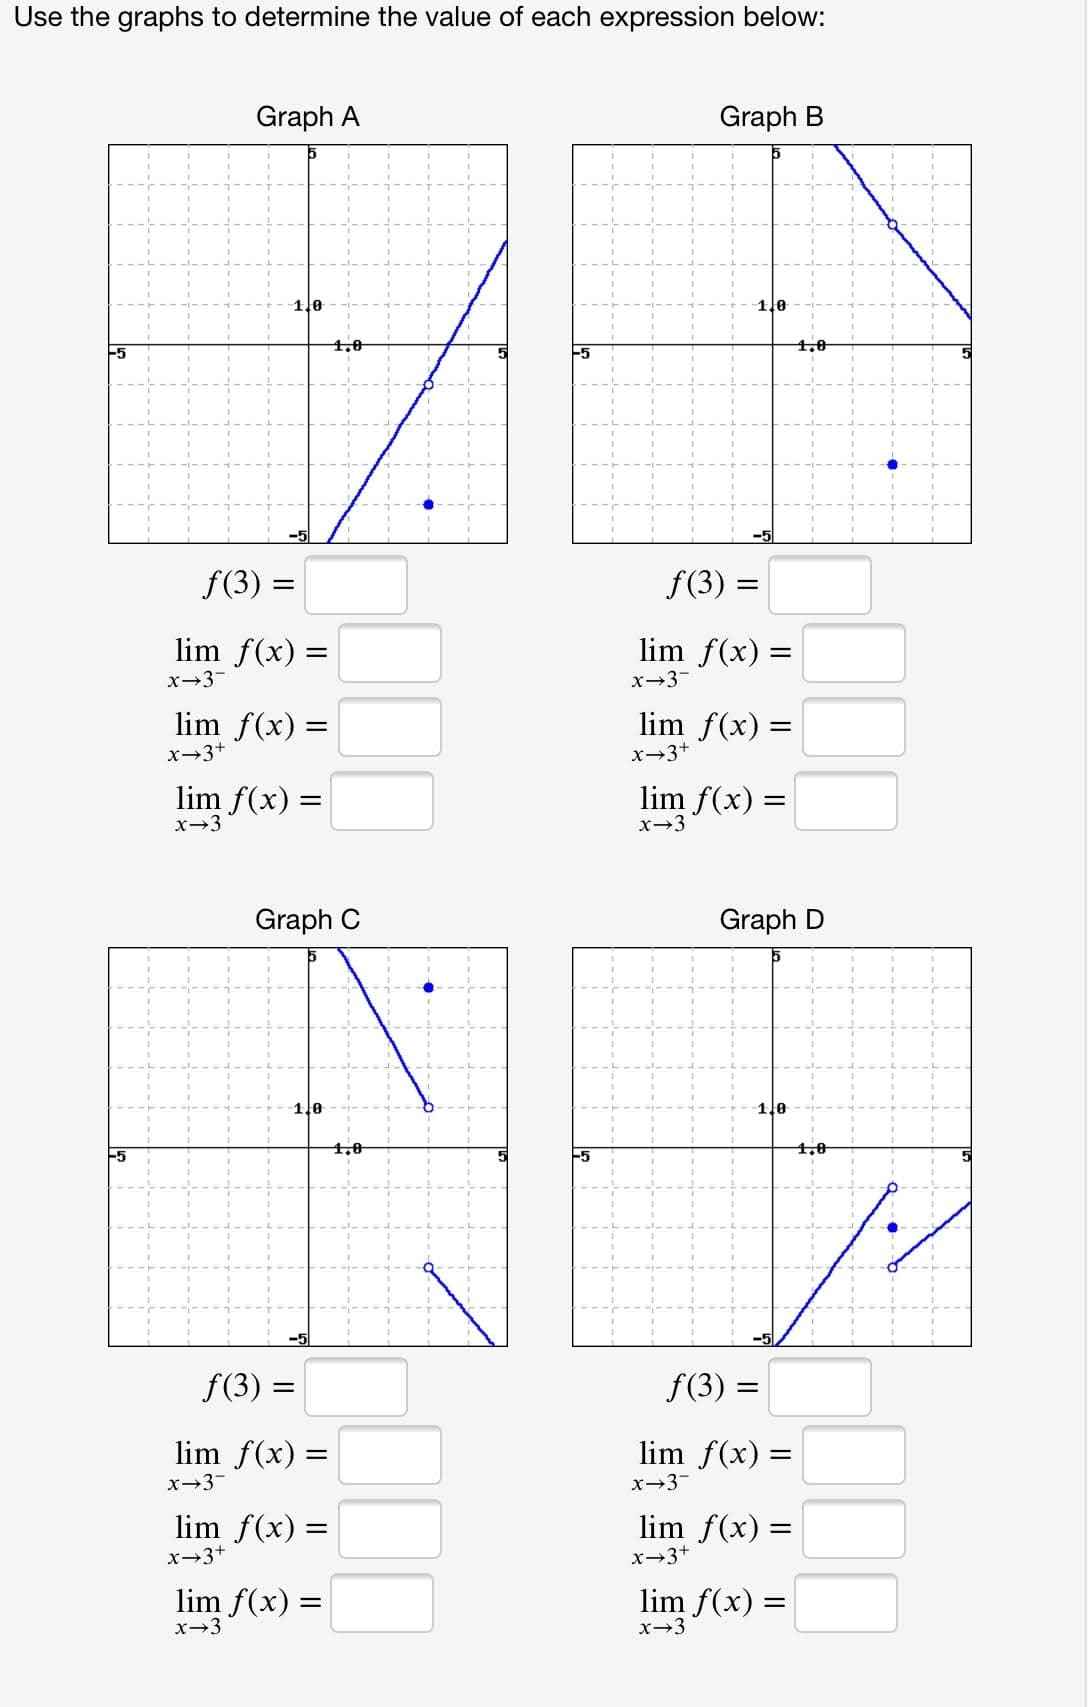 Use the graphs to determine the value of each expression below:
